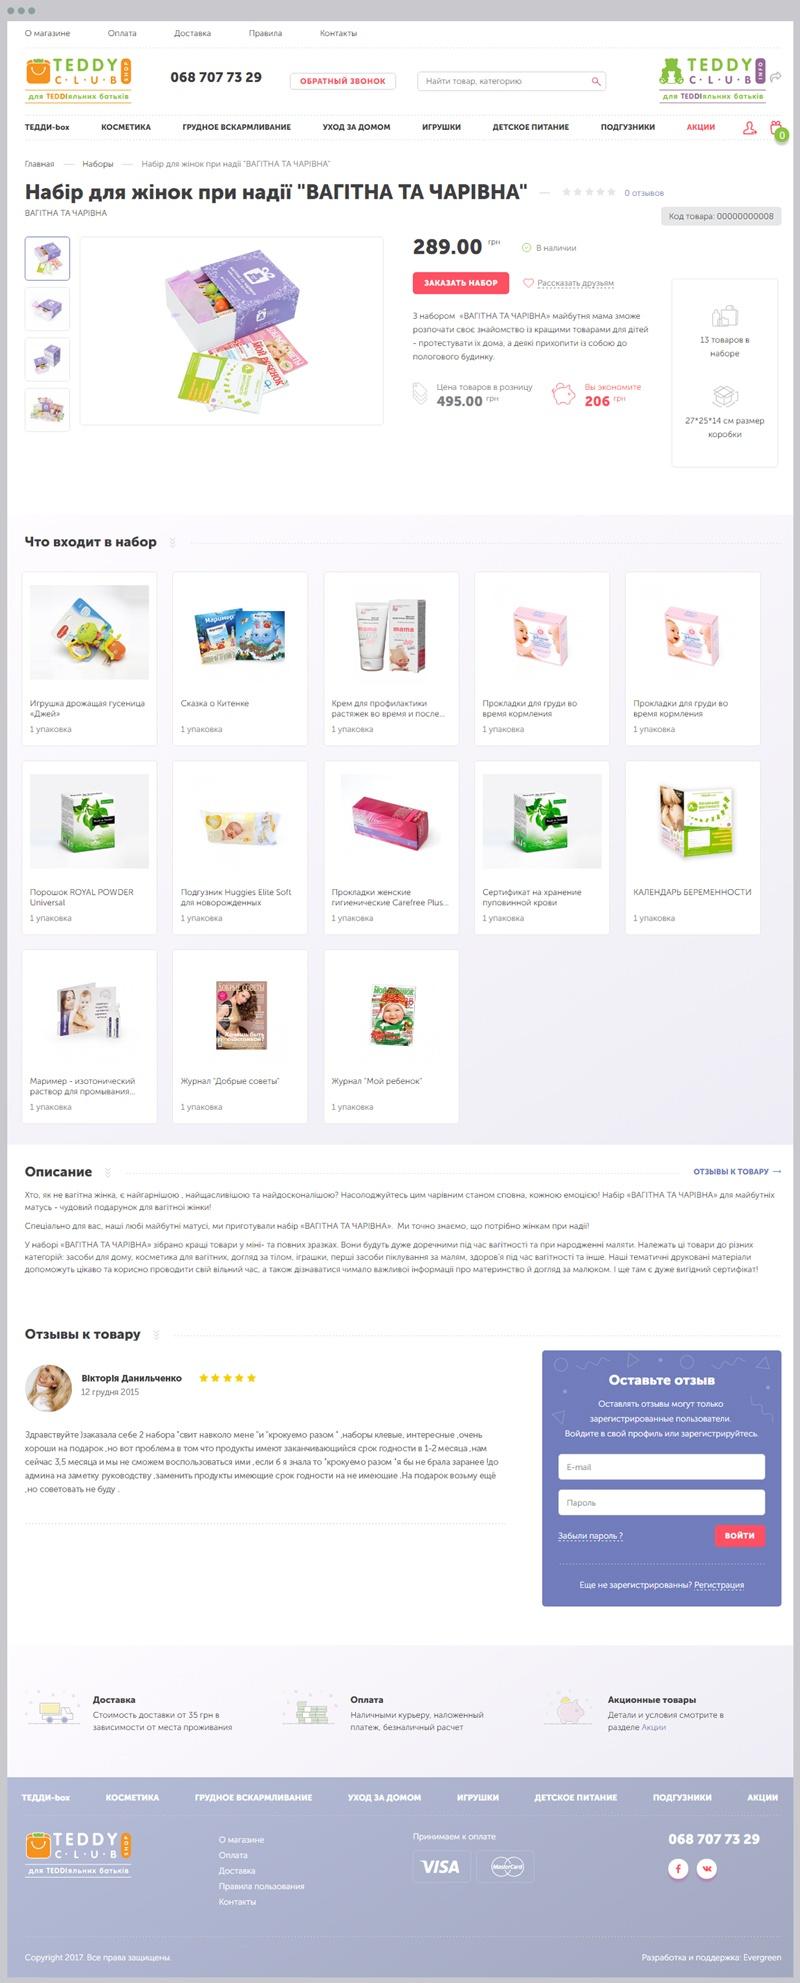 Online store for young parents | Evergreen projects 12